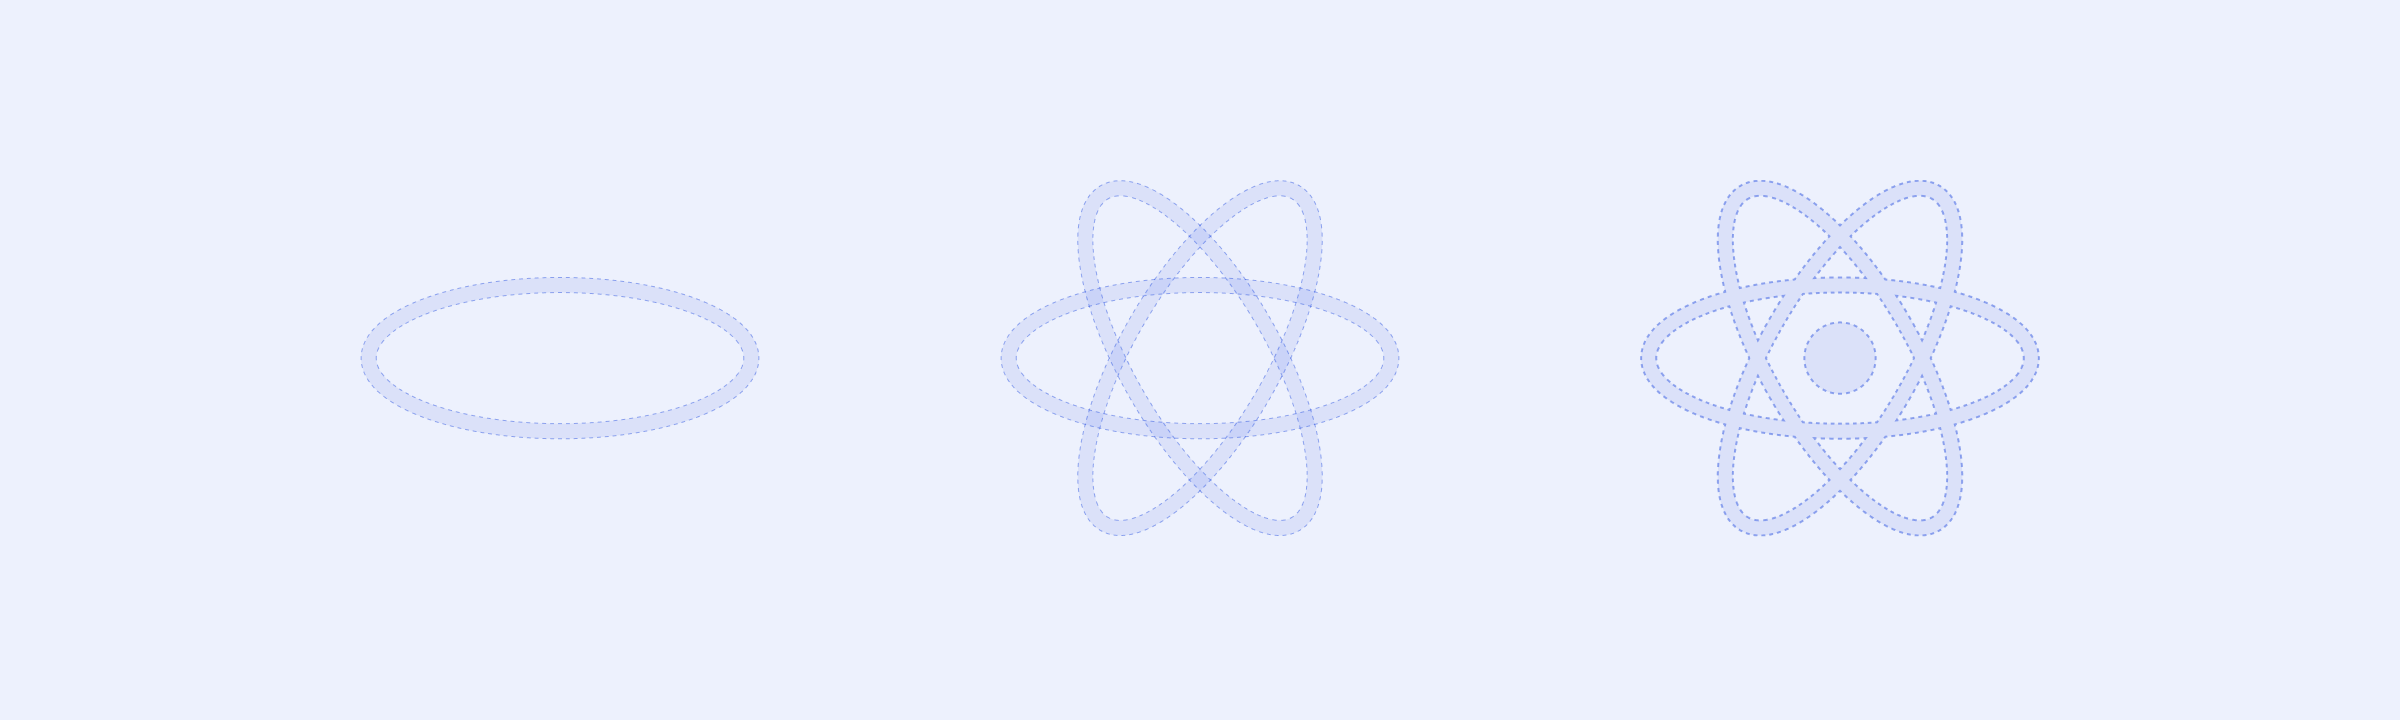 react-logo-in-steps.png